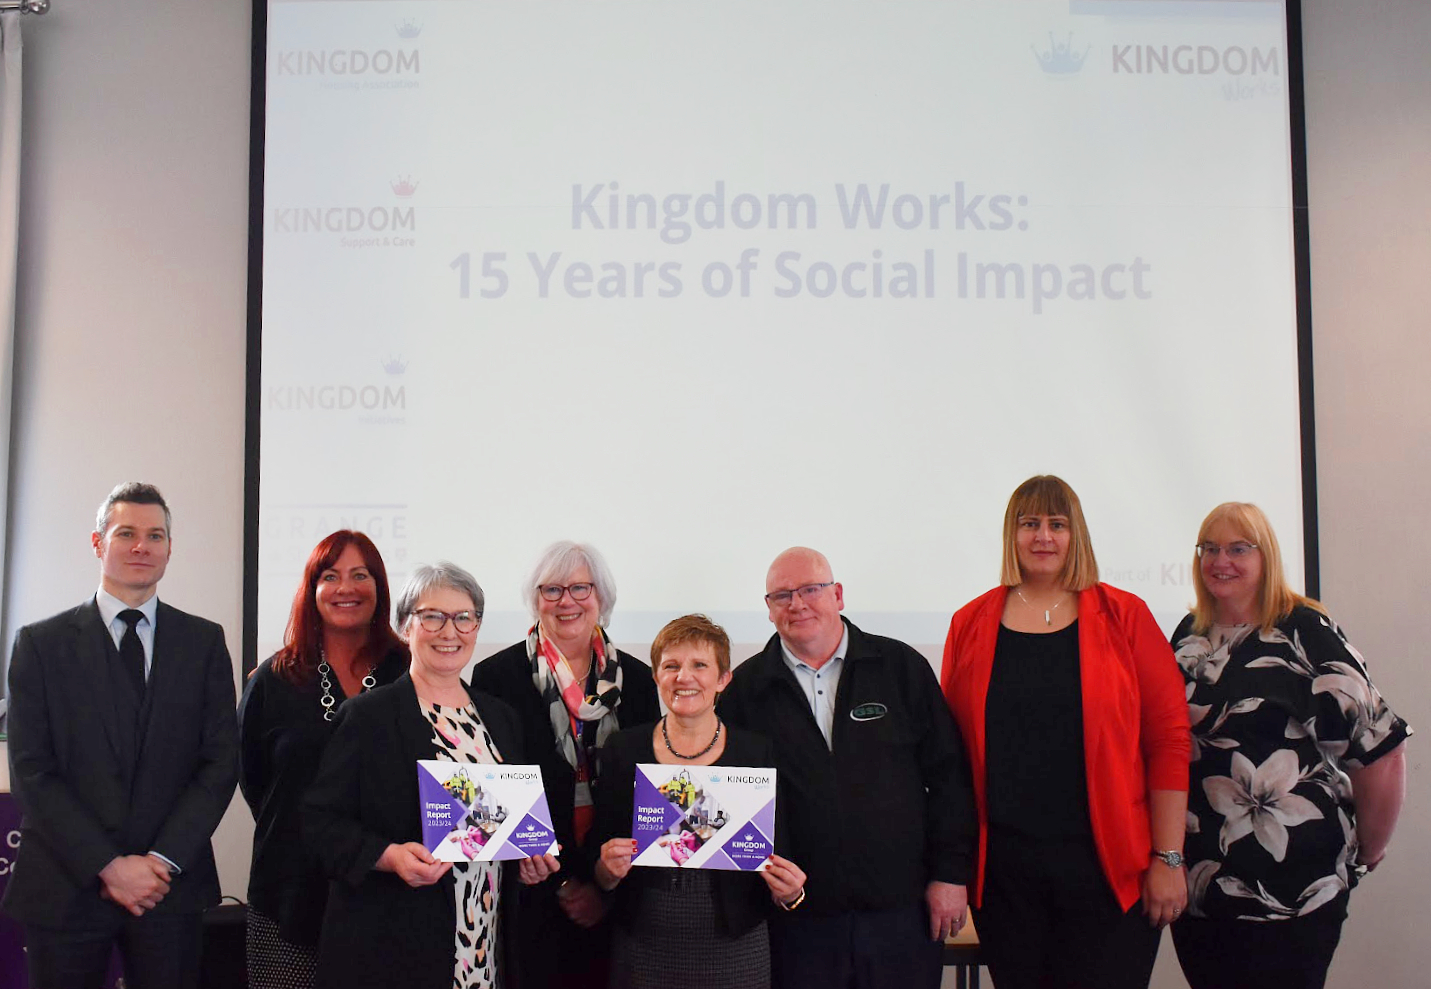 Kingdom launches first Community Impact Report into Fife employability project